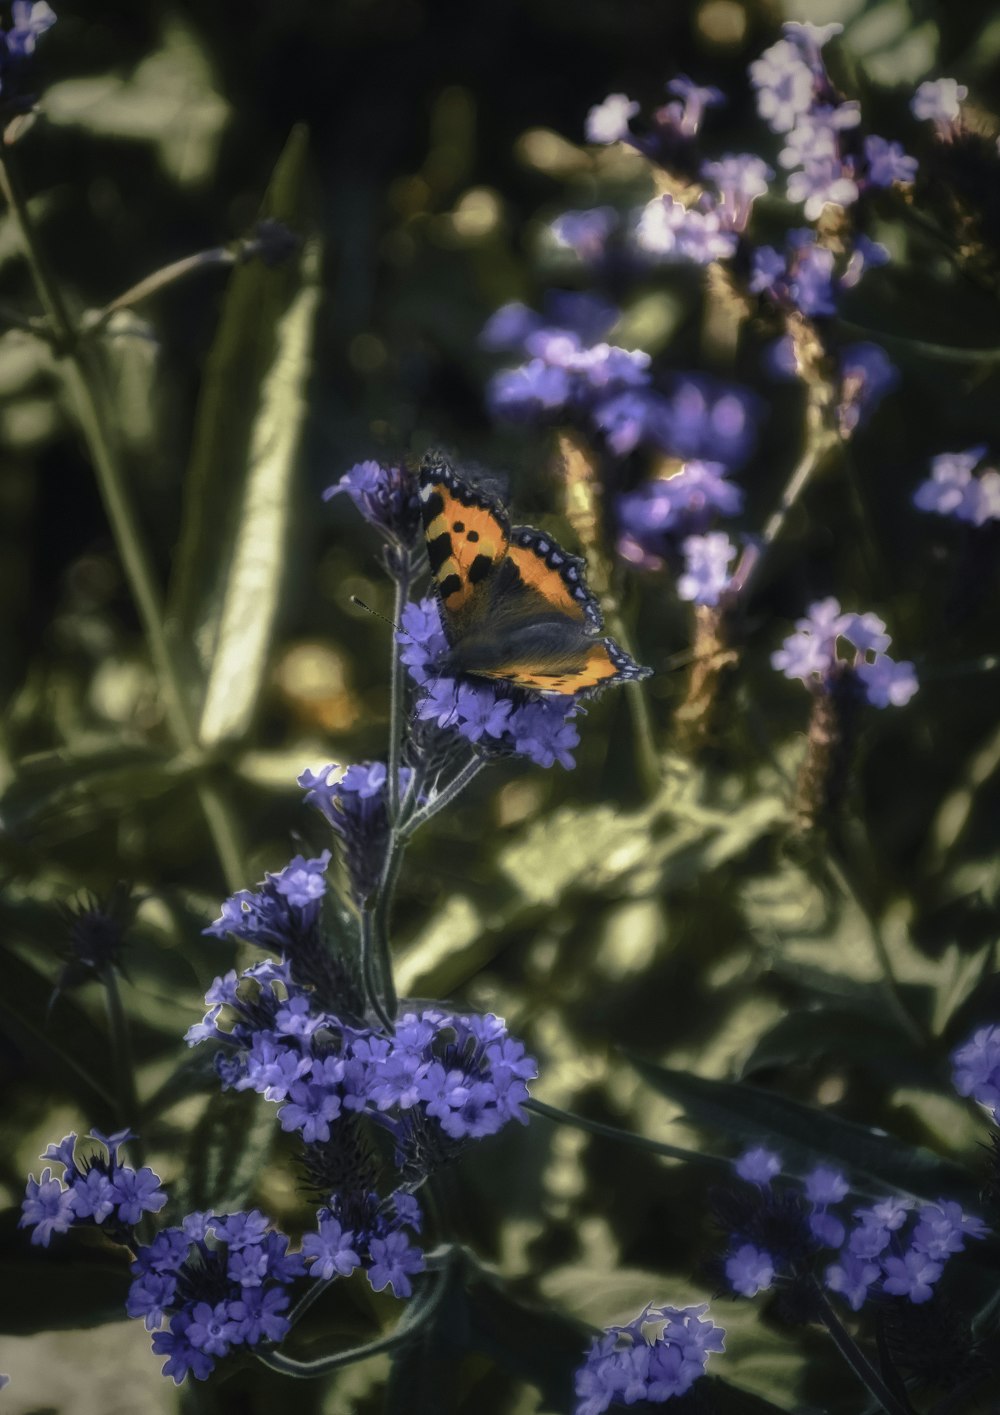 orange black and white butterfly perched on purple flower